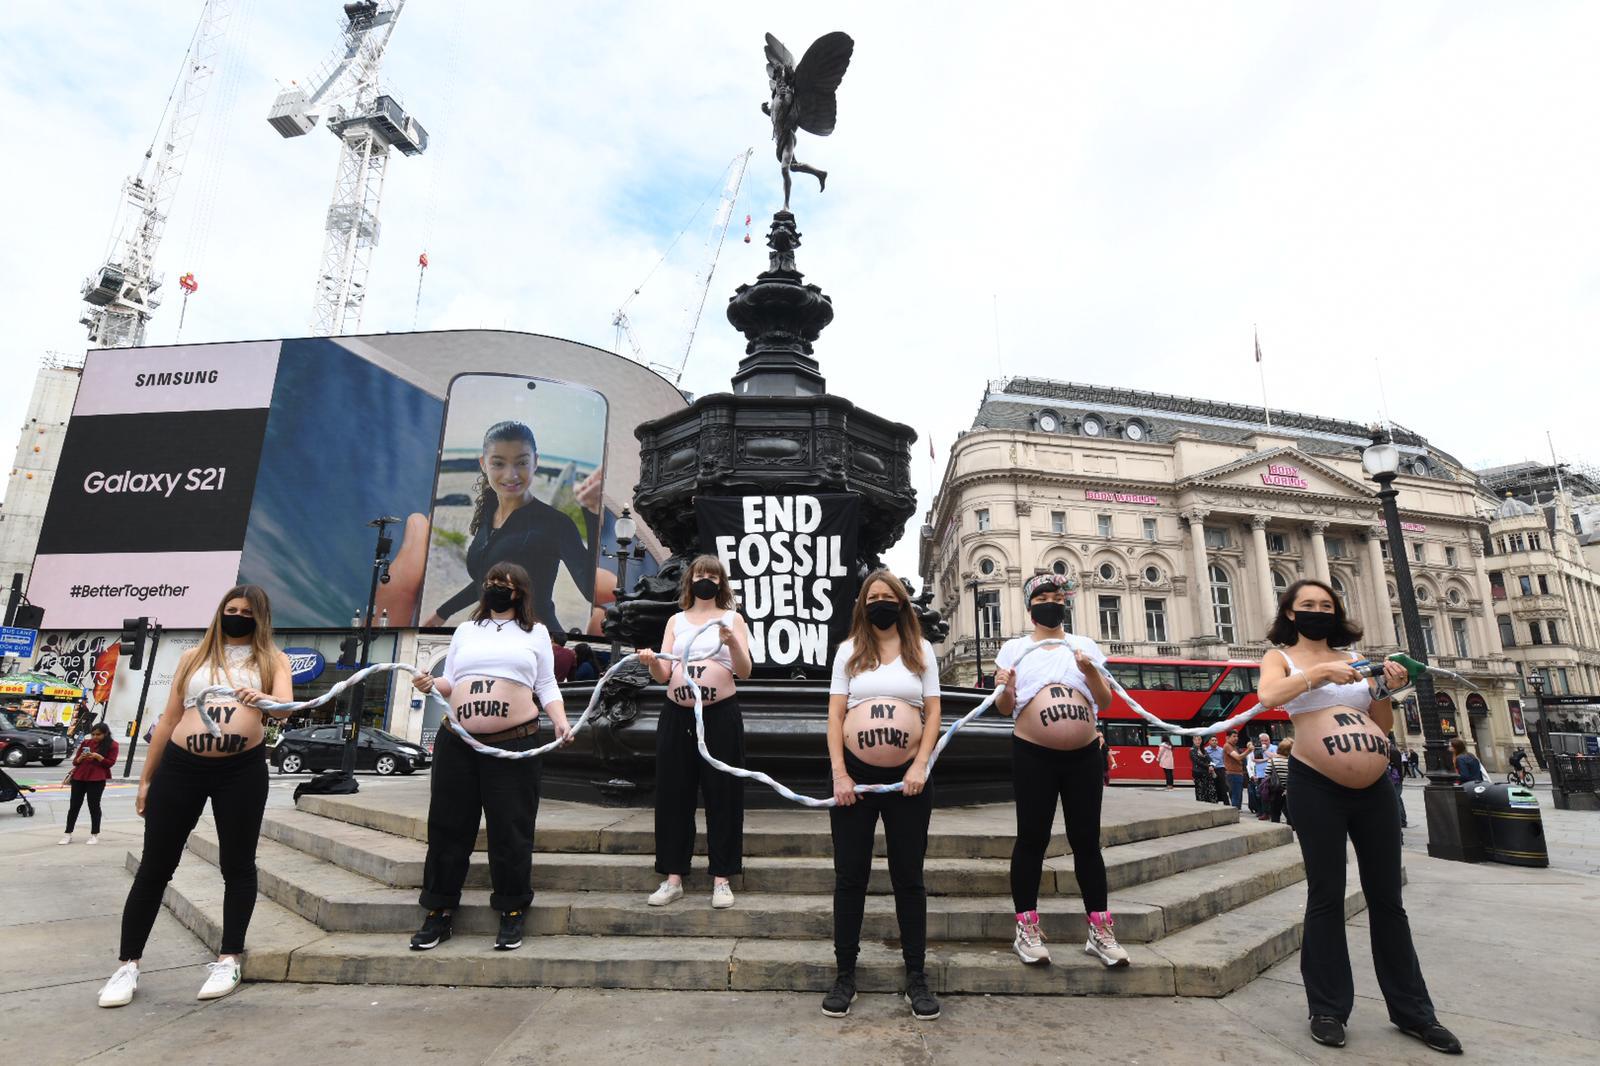 Six Pregnant Women Bare Their Bumps At Piccadilly Circus Demanding An End To Fossil Fuels